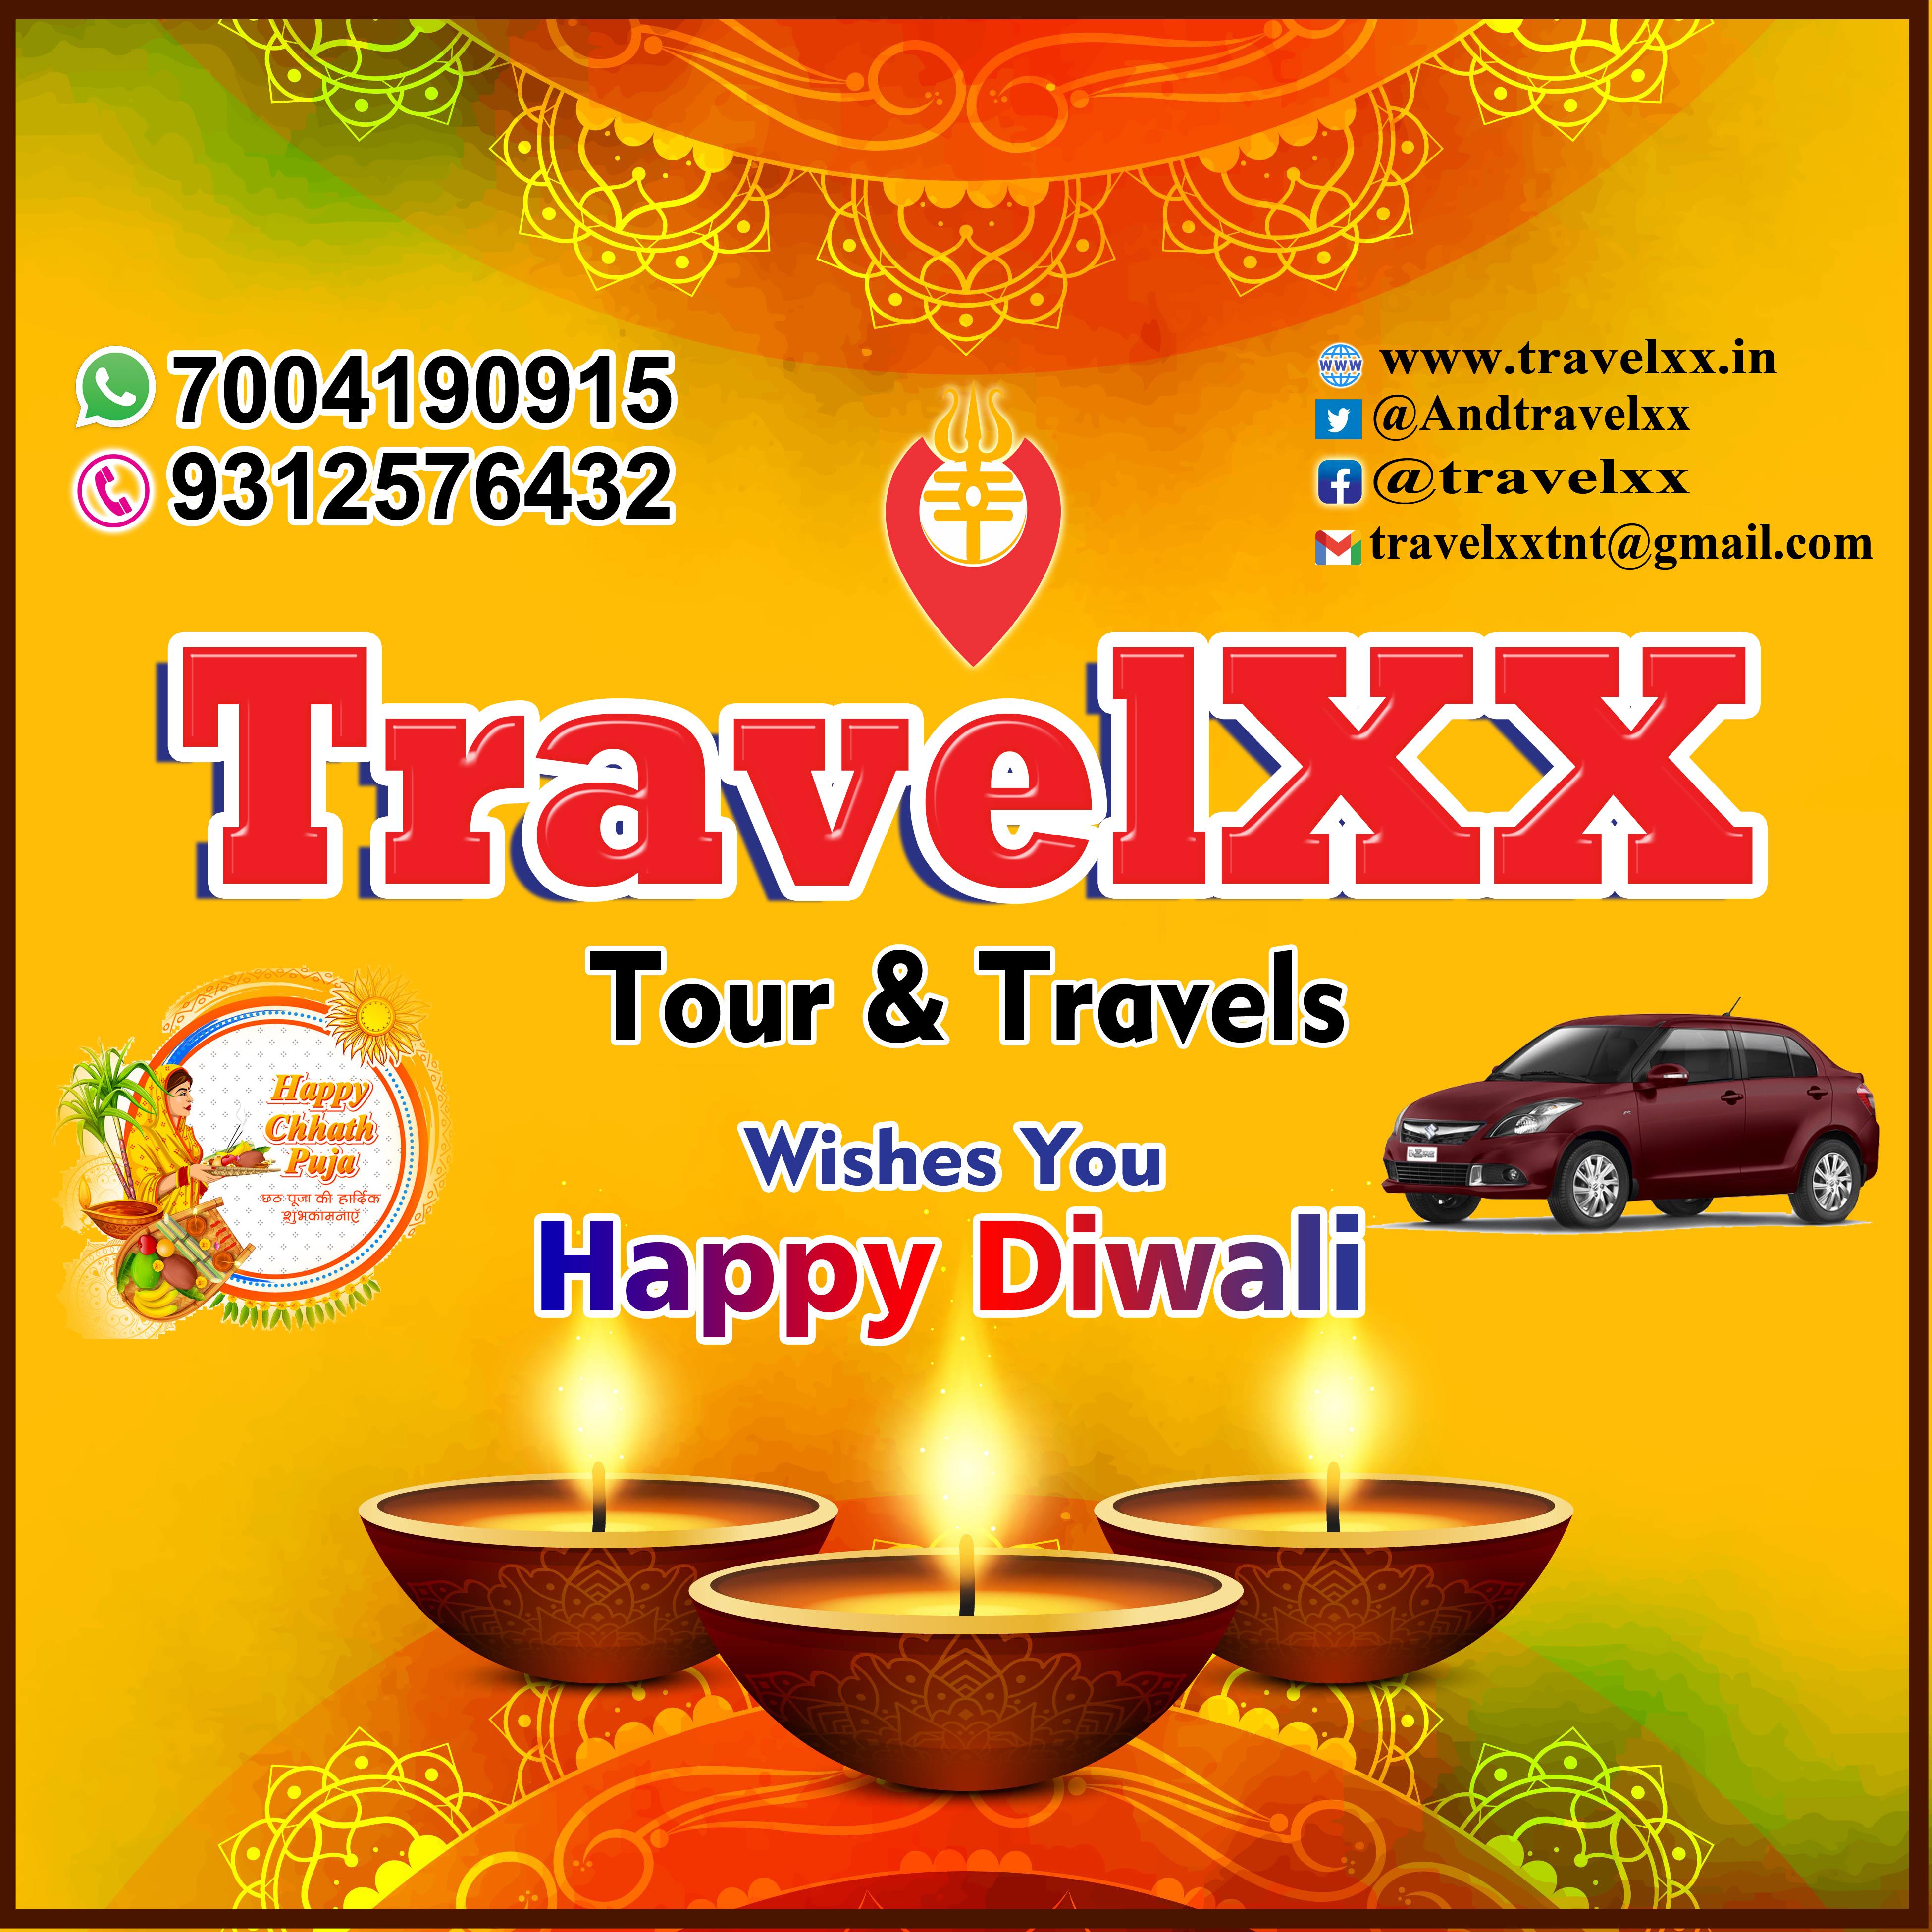 Travelxx Tour And Travels